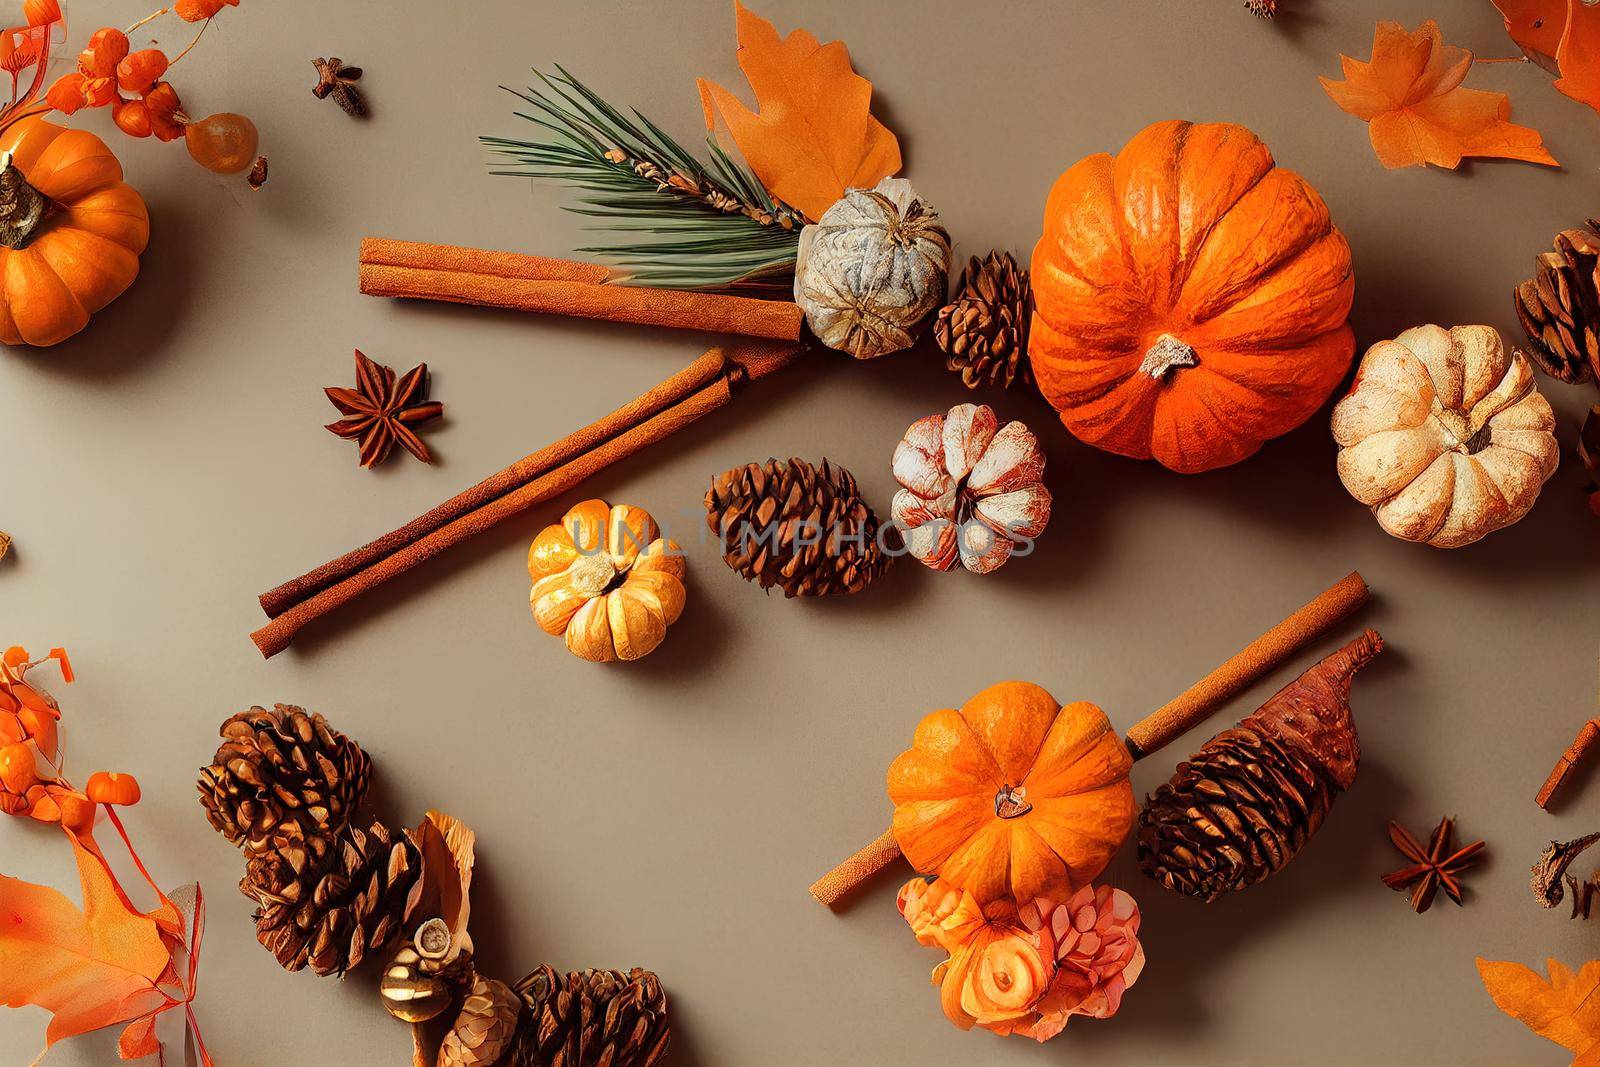 Autumn composition with orange pumpkin ,pine cones, cinnamon sticks, flowers and small gifts Flat lay, top view , anime style